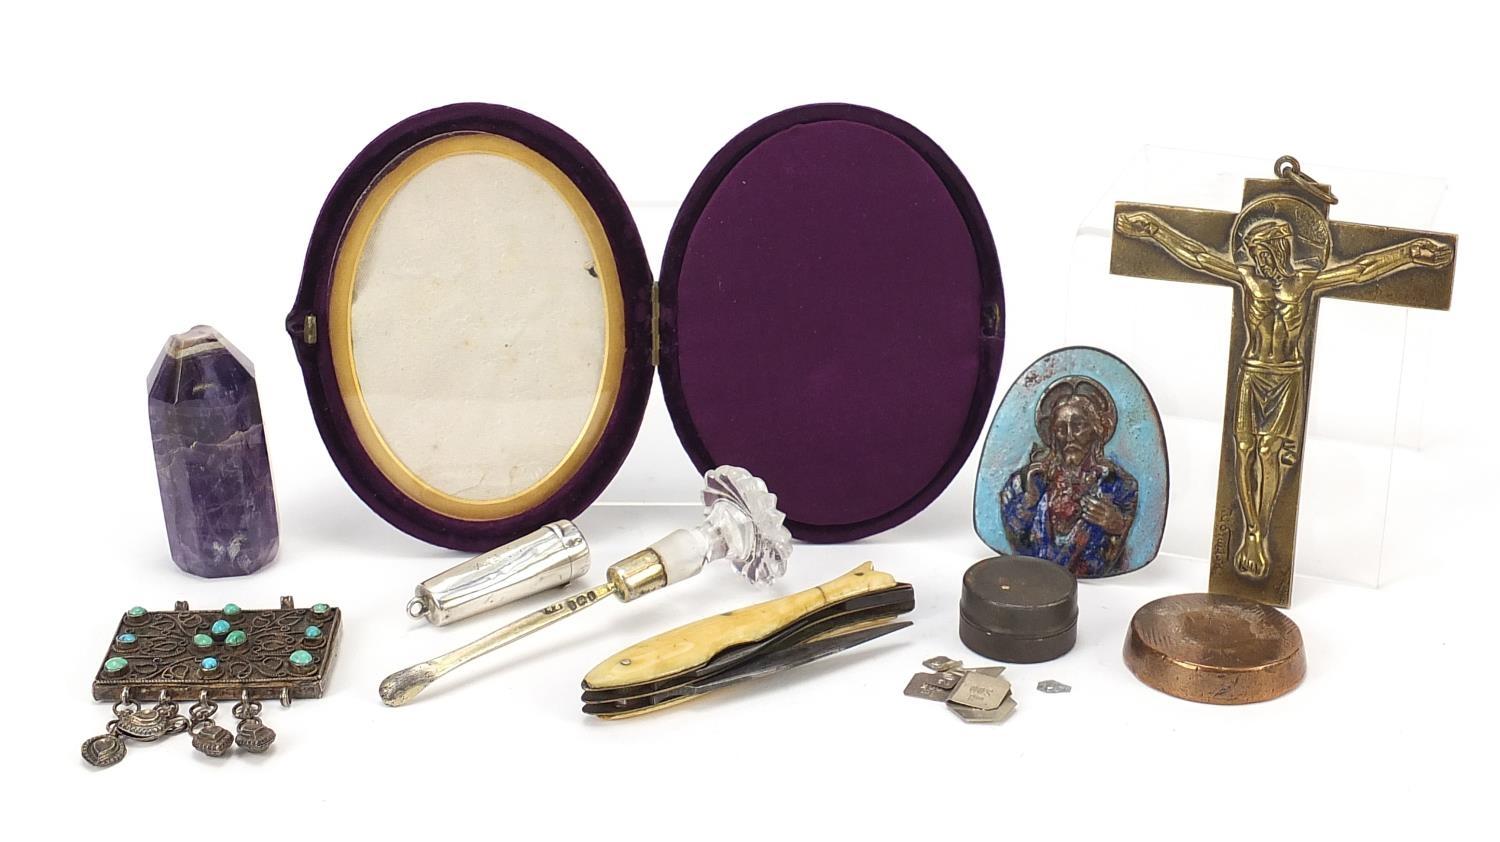 Antique and later objects including a silver cheroot case, glass handled silver gilt scoop, early